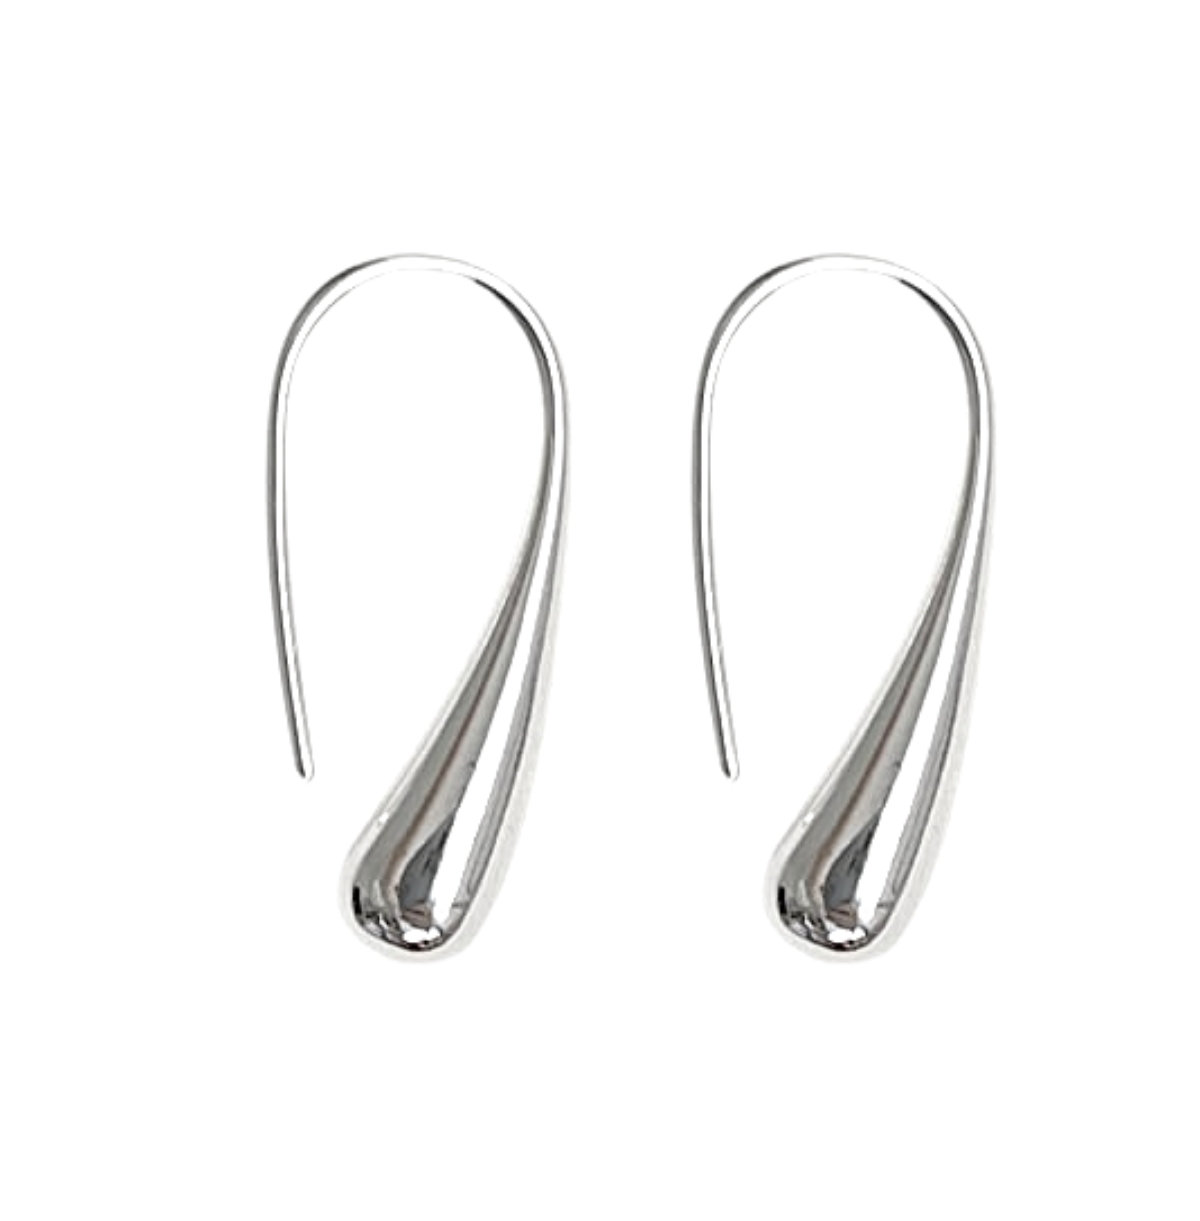 Exquisite Sterling Silver Plated Teardrop Earrings: Timeless Elegance for Every Occasion - Silver